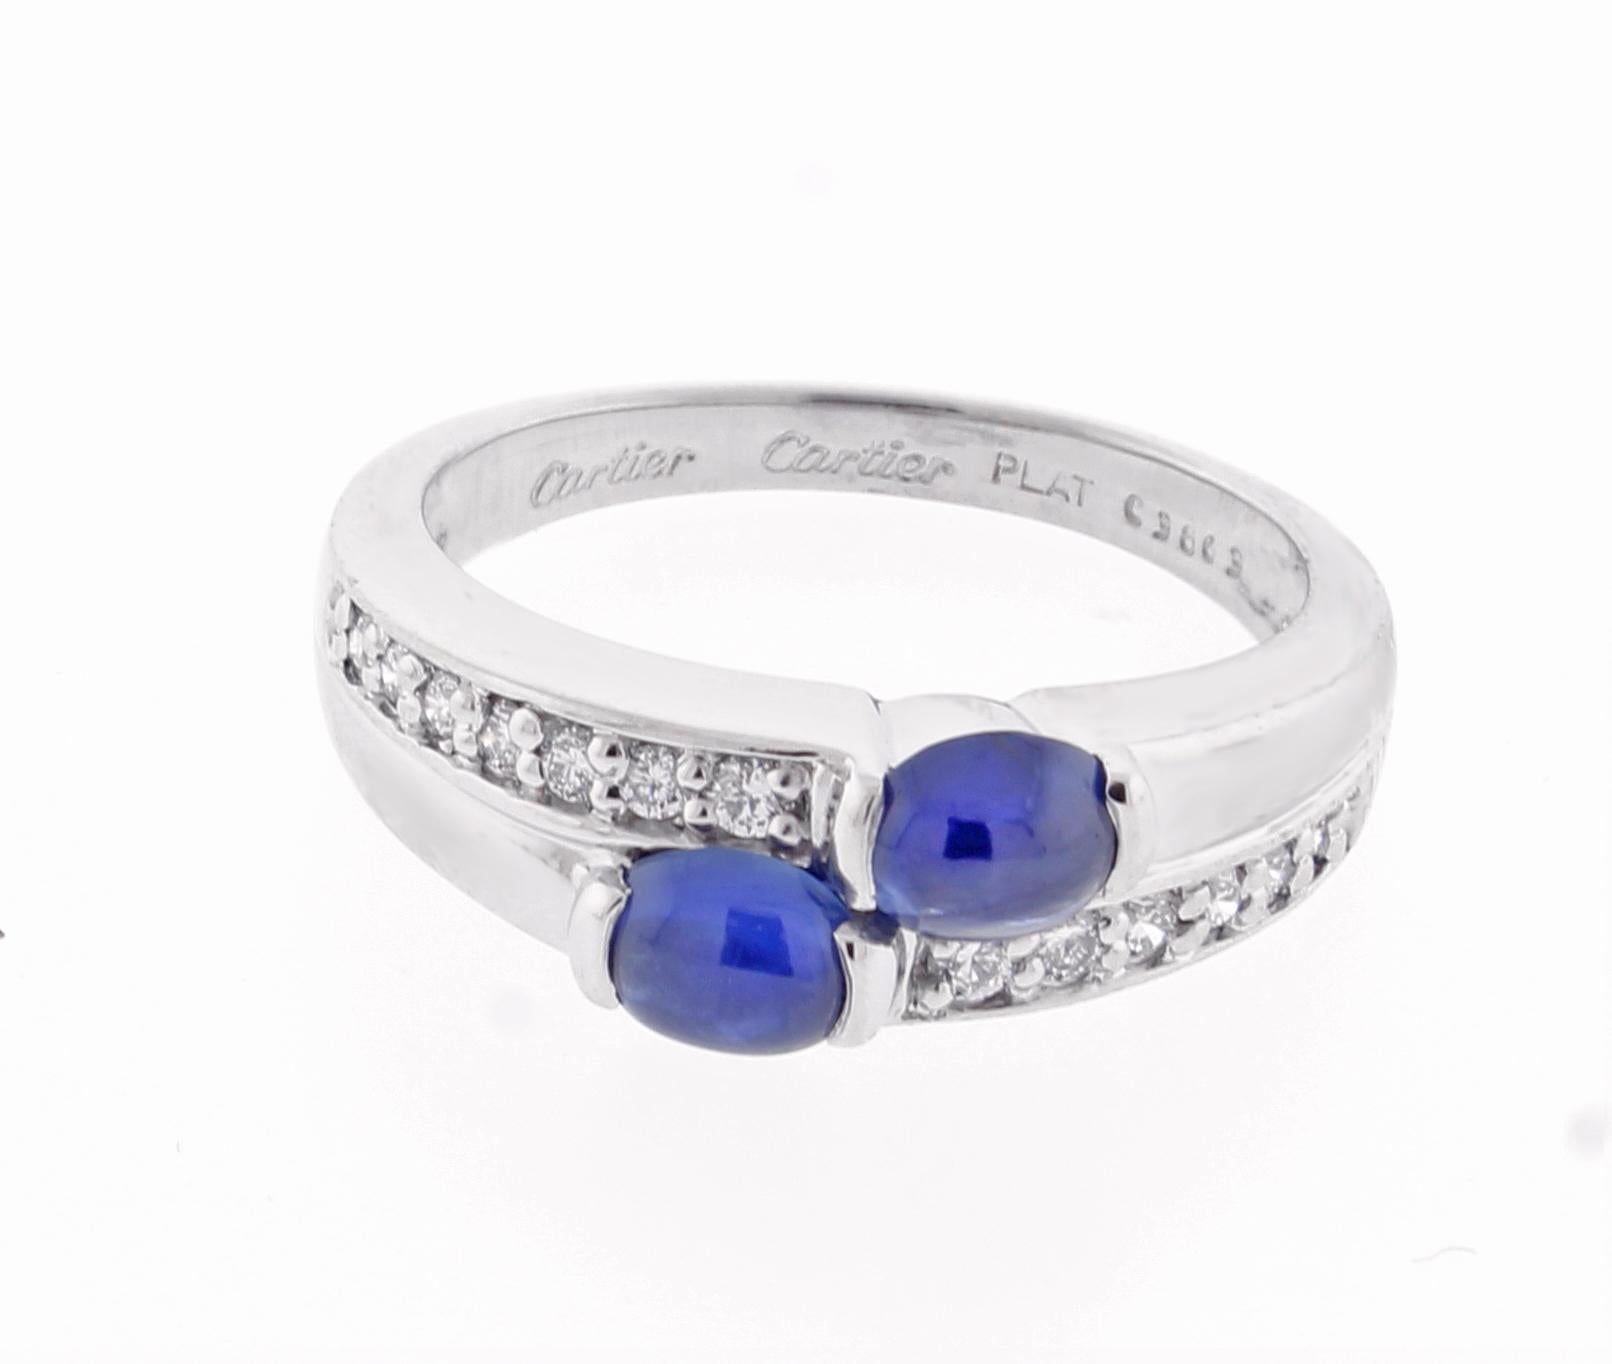 ♦ Designer: Cartier
♦ Metal:Platinum
♦ Gem stone: 16 Diamonds=.25 carats
♦ Gem stone: 2 Sapphires=.85 carats
♦ Circa 1995
♦ Size 6½, Resizable Limited
♦ Packaging:Cartier Boxes
♦ Condition: Excellent , pre-owned
♦ Price: Based on the market, prices